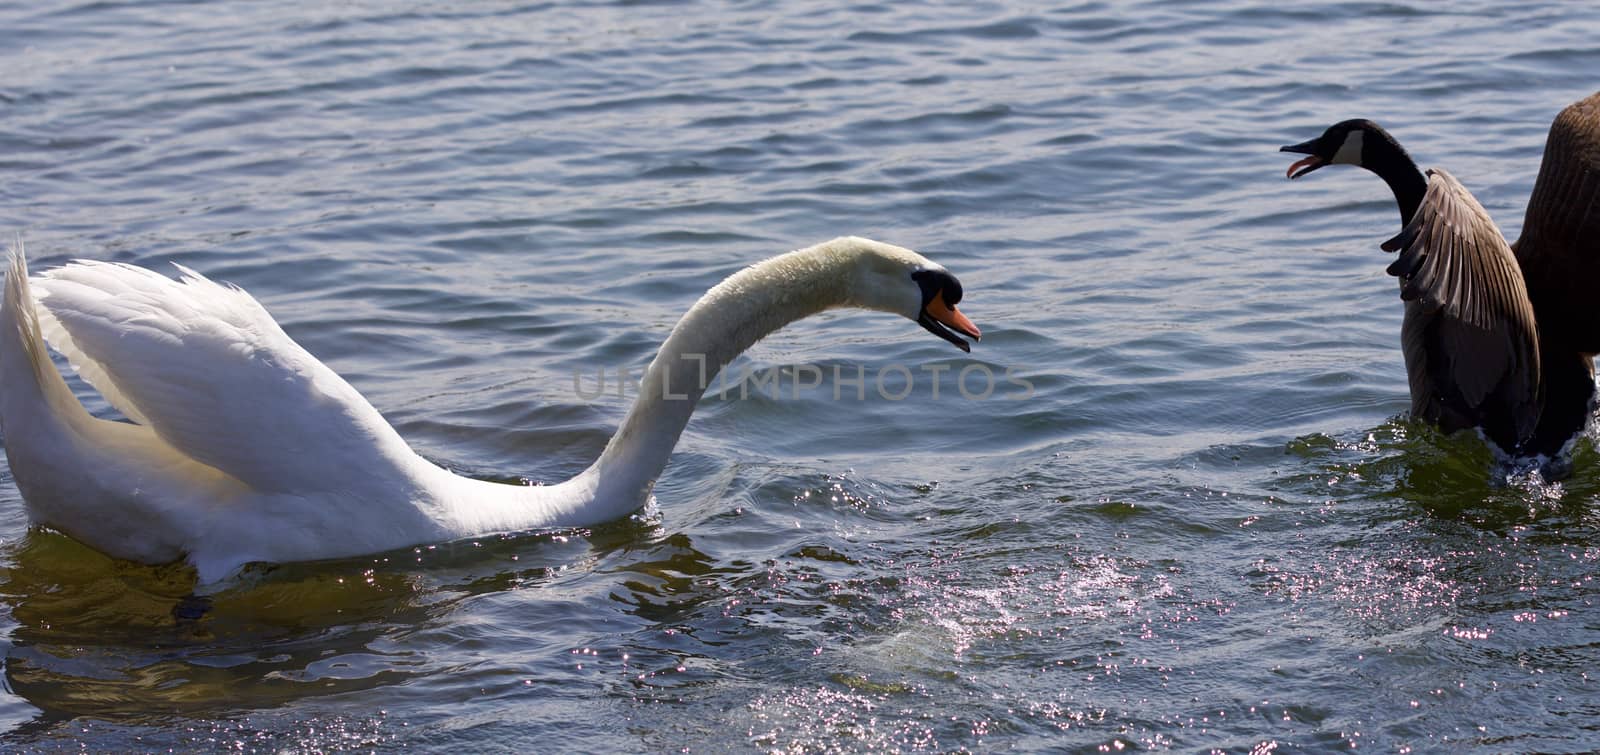 Beautiful isolated photo of the amazing fight between the Canada goose and the swan by teo